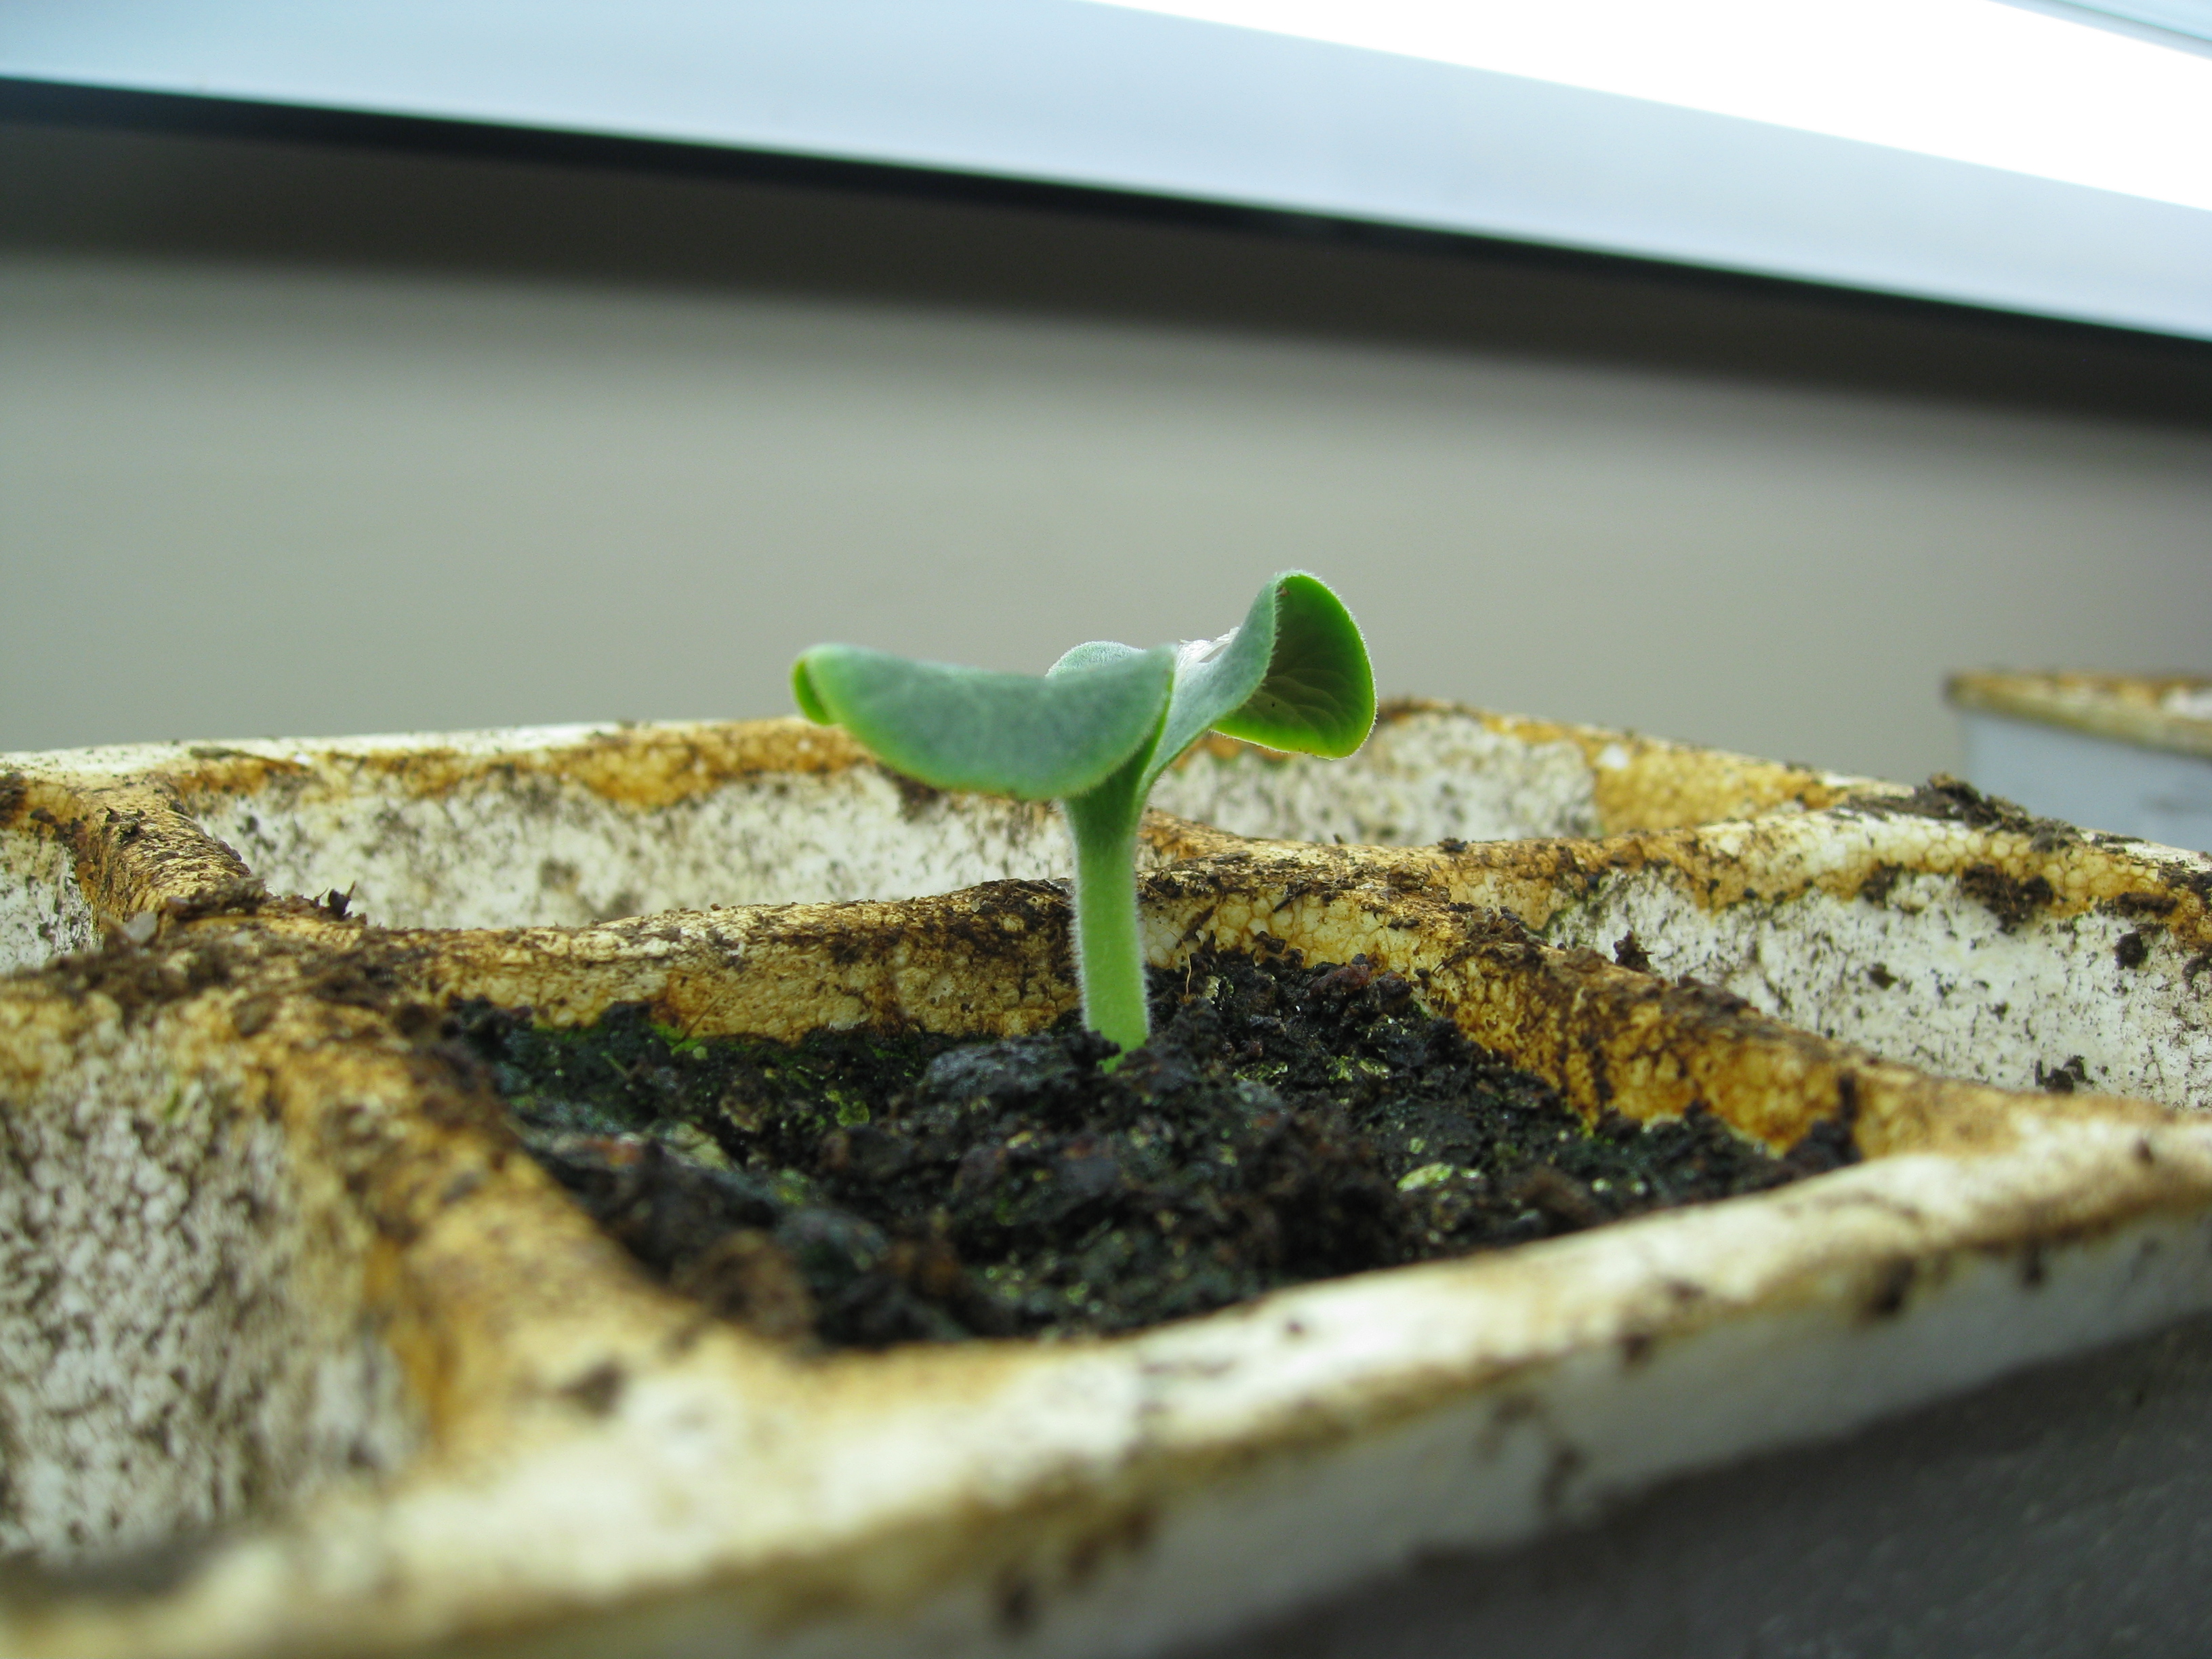 Butternut squash seedling pokes out of the seed tray.